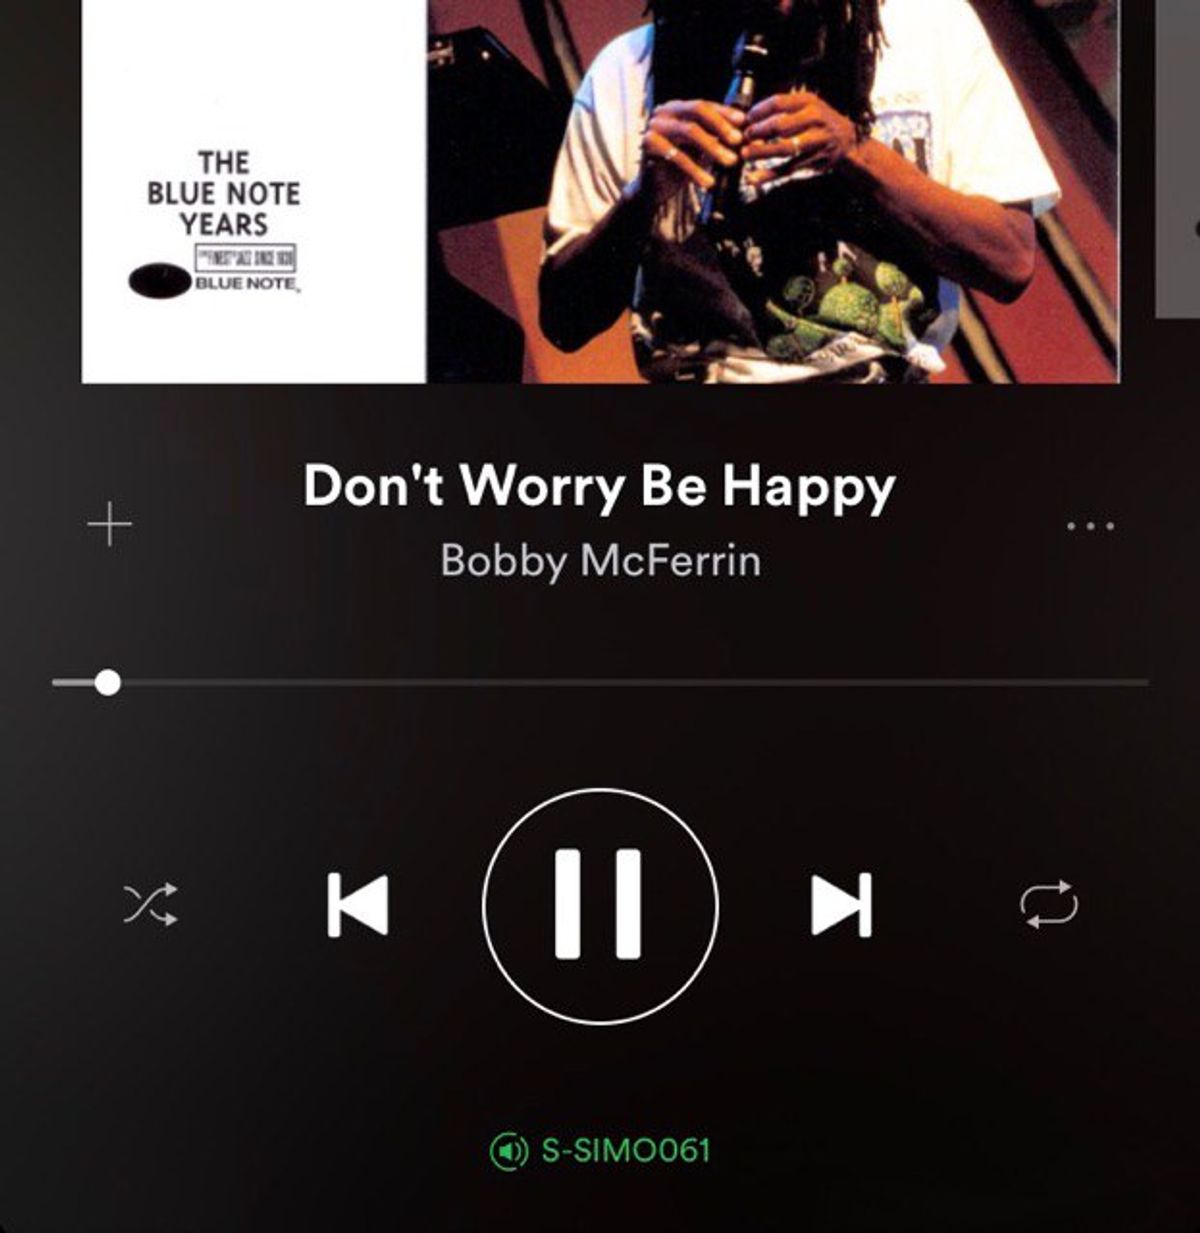 Some of the Best Songs For When You're in a Bad Mood